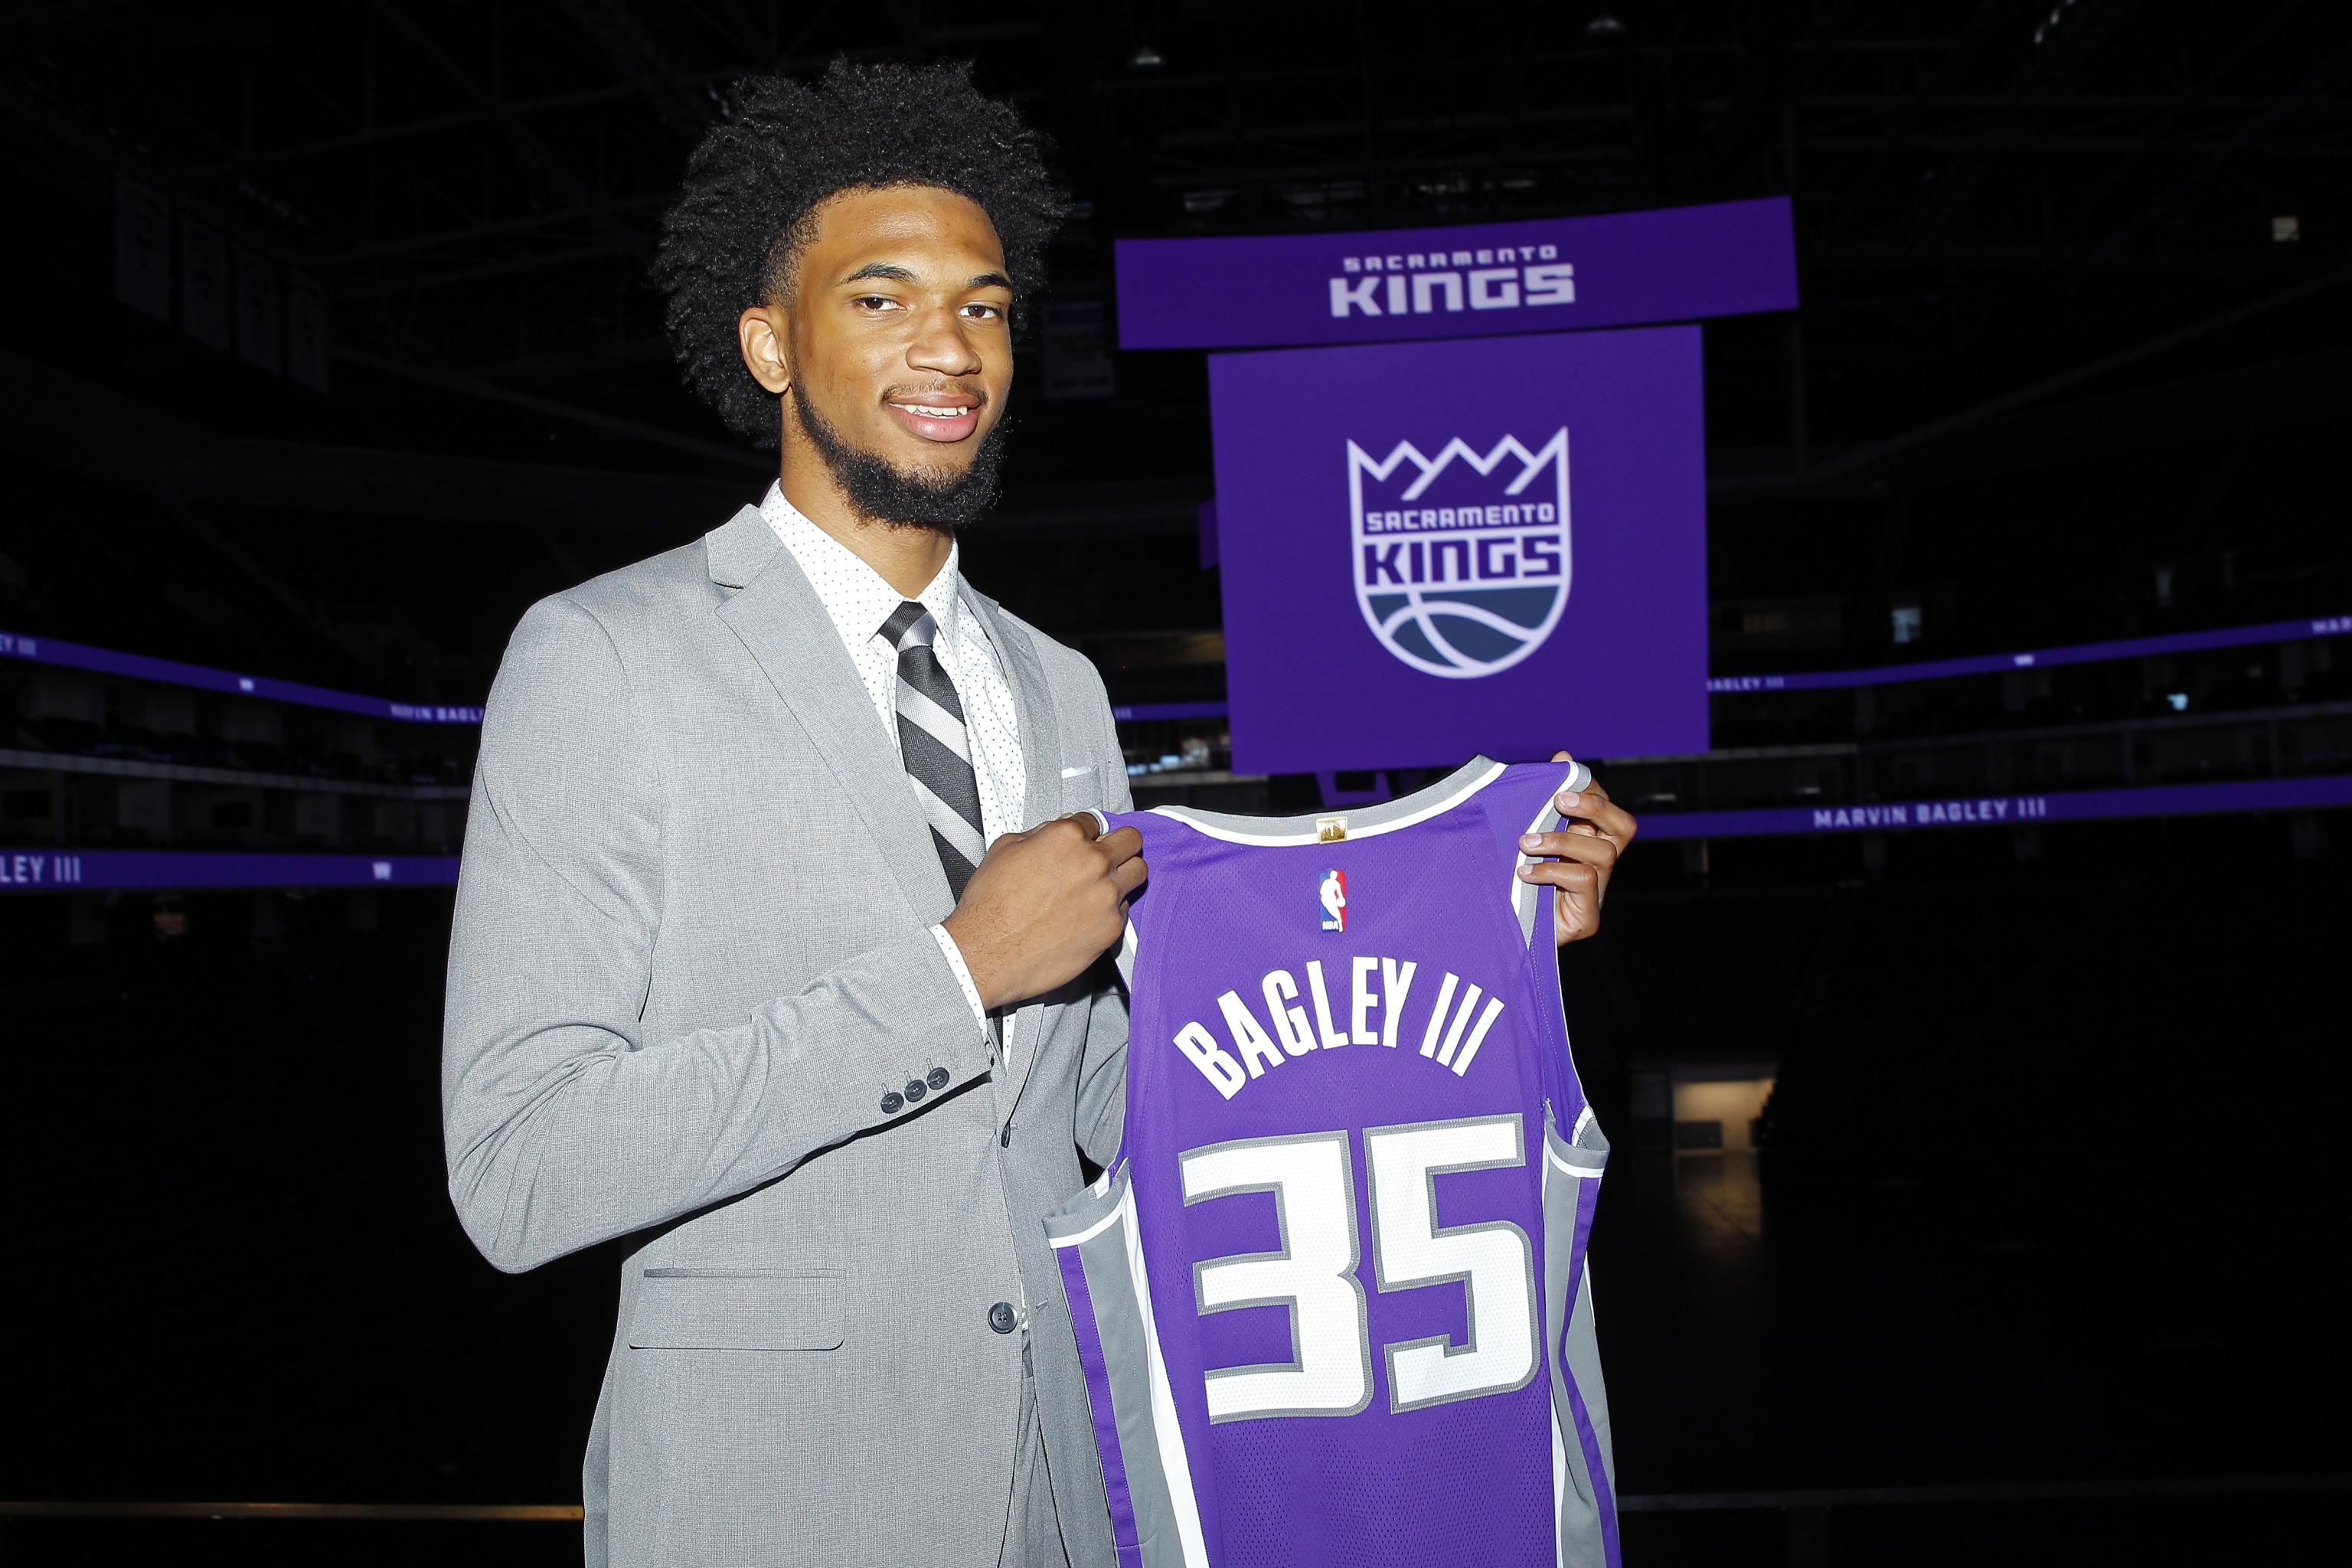 De'Aaron Fox's Father Weighs In on Marvin Bagley III's Tension With Kings:  'Trade Him